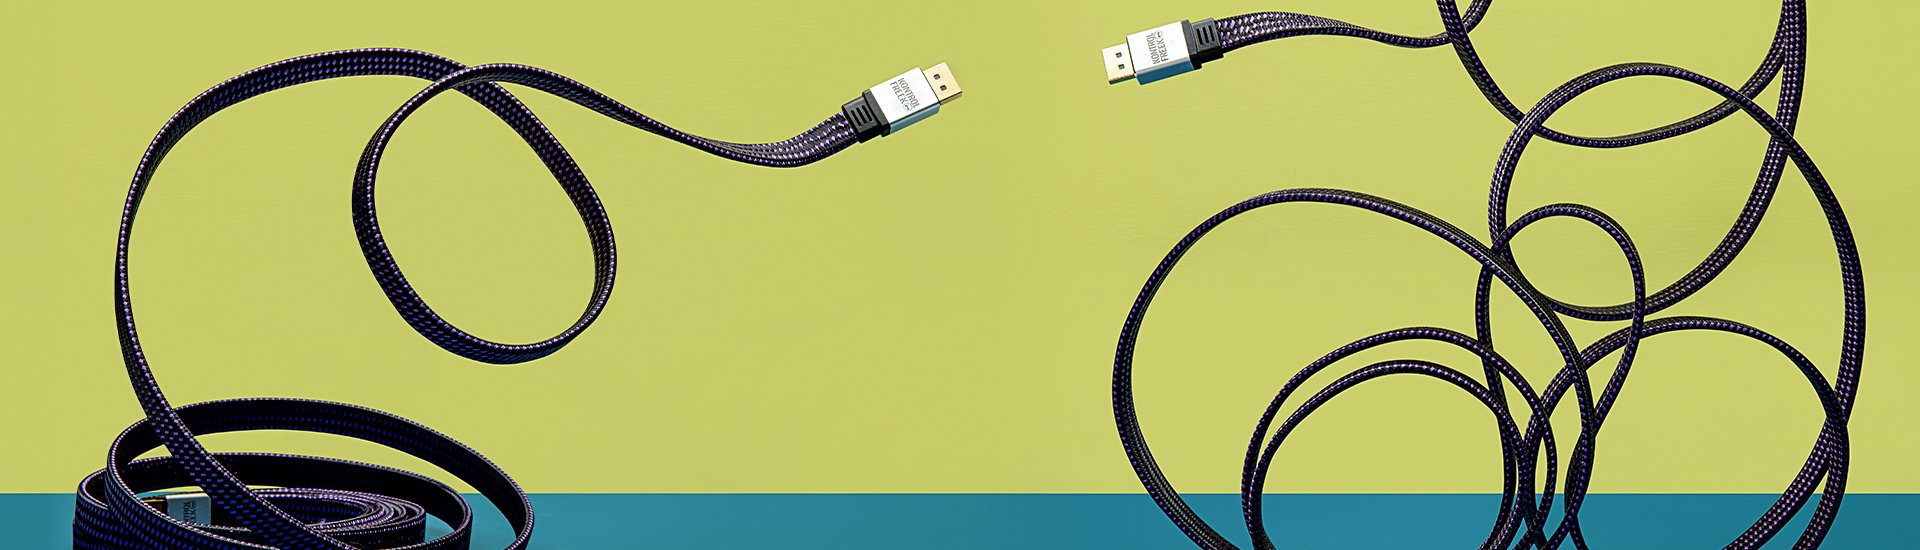 Gaming Cables banner